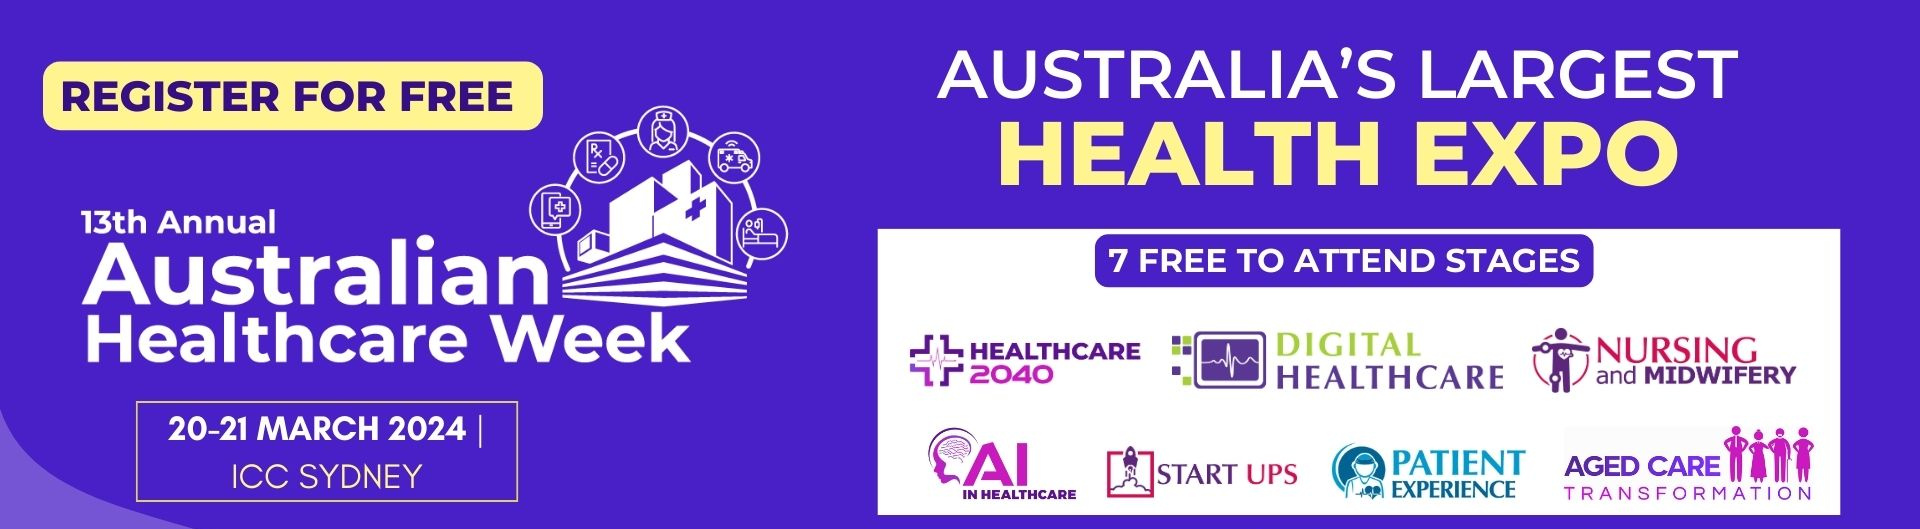 Australian Healthcare Week is heading to ICC Sydney on 20 to 21 March 2024.